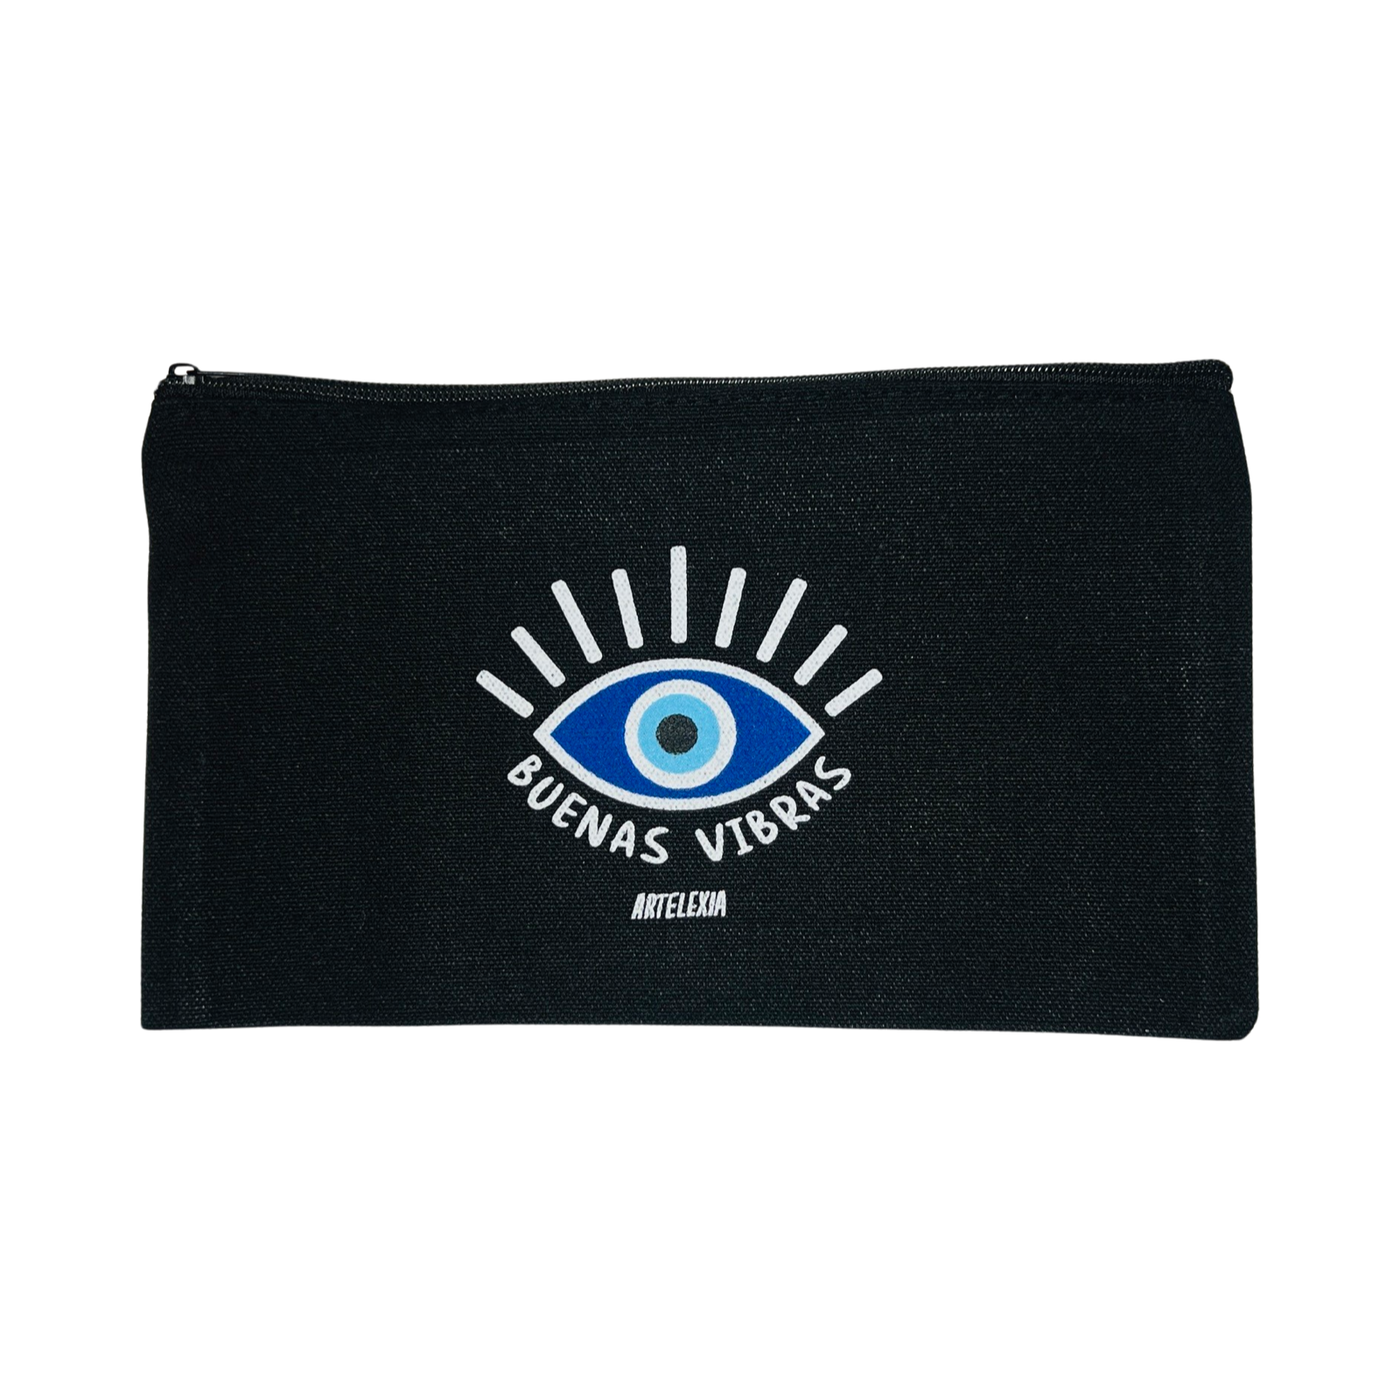 black canvas zipper pouch with the phrase buenas vibras in white lettering and an image of a blue and white eye.